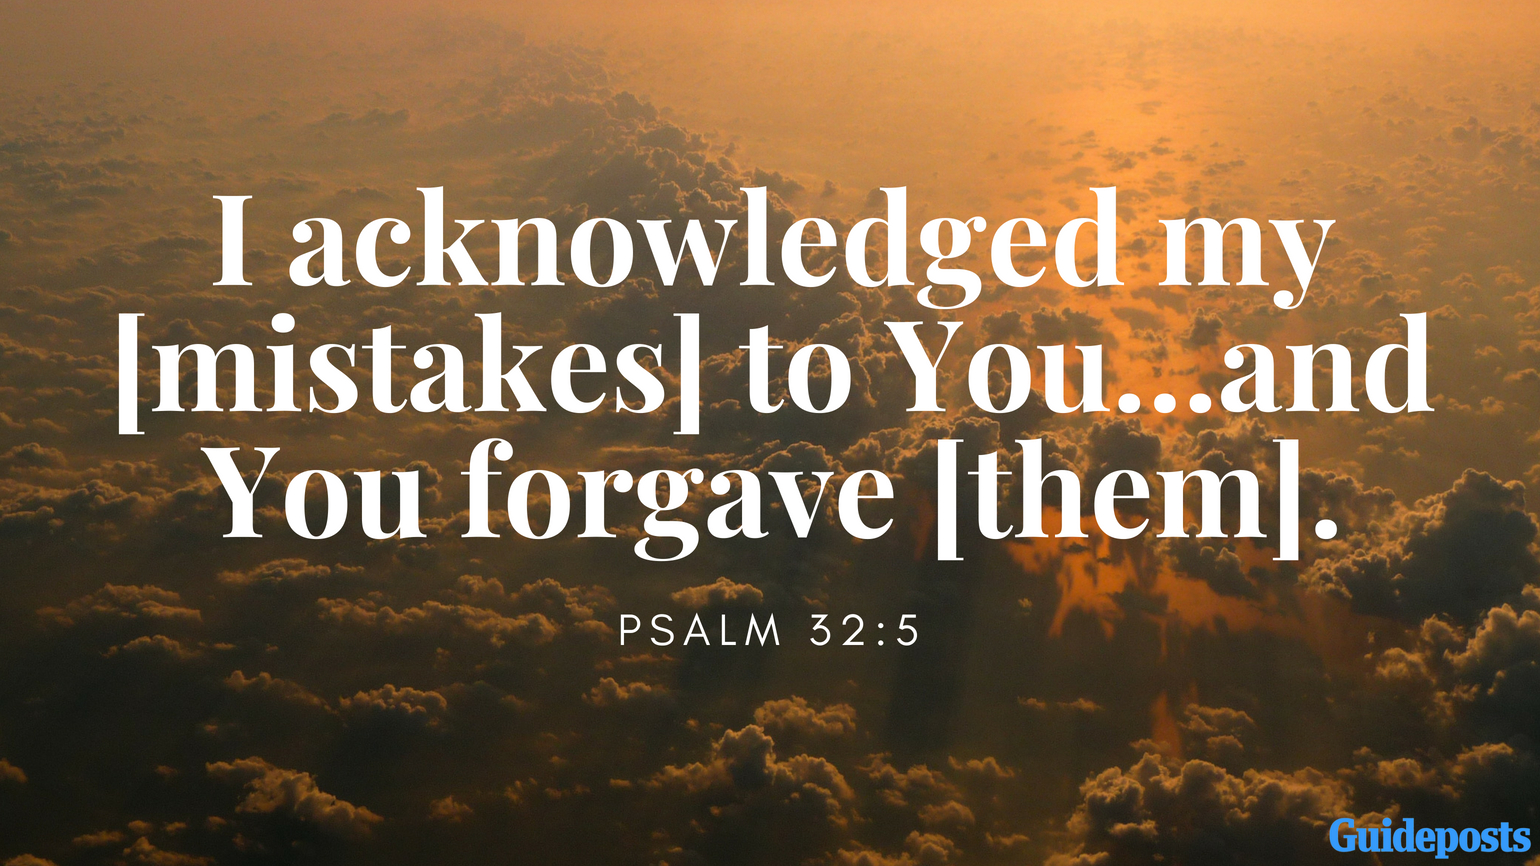 Bible Verses to Help You Forgive Yourself: I acknowledged my [mistakes] to You…and You forgave [them]. Psalm 32:5 better living life advice